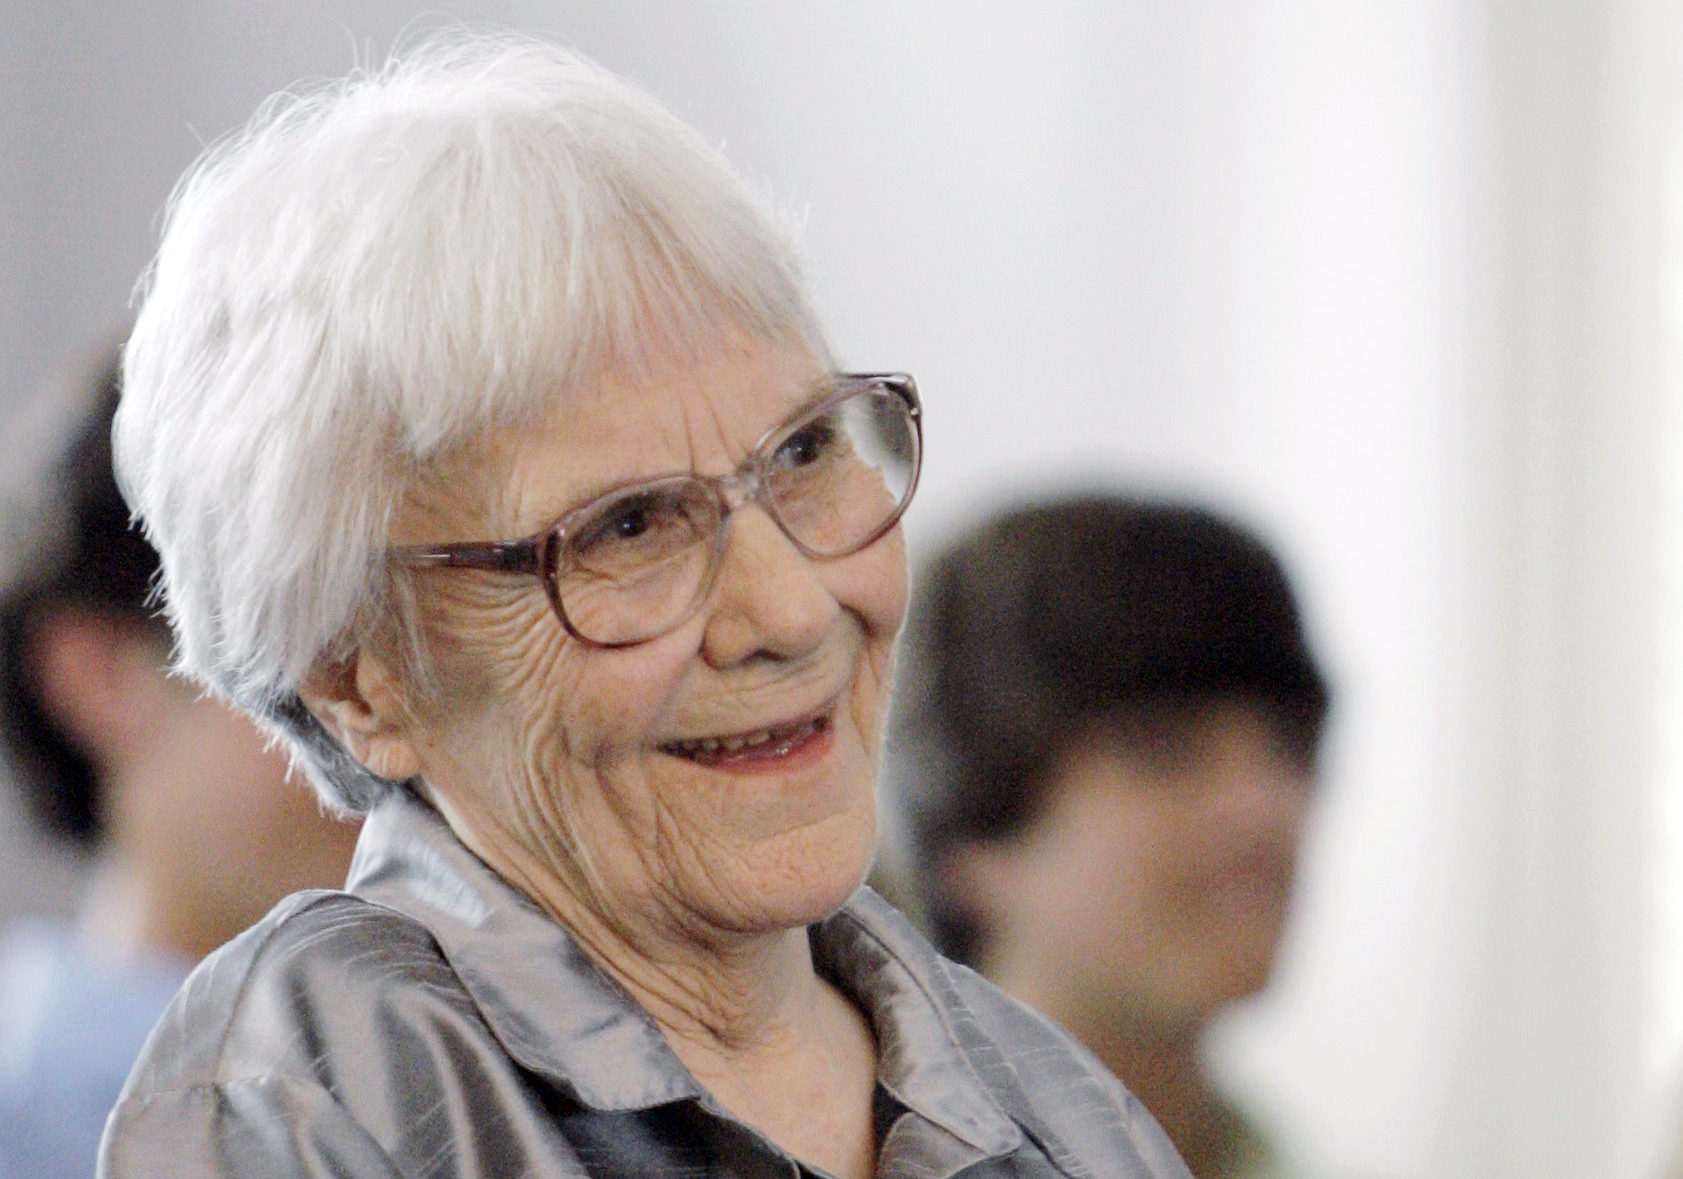 Harper Lee, author of ‘To Kill a Mockingbird,’ dies at 89